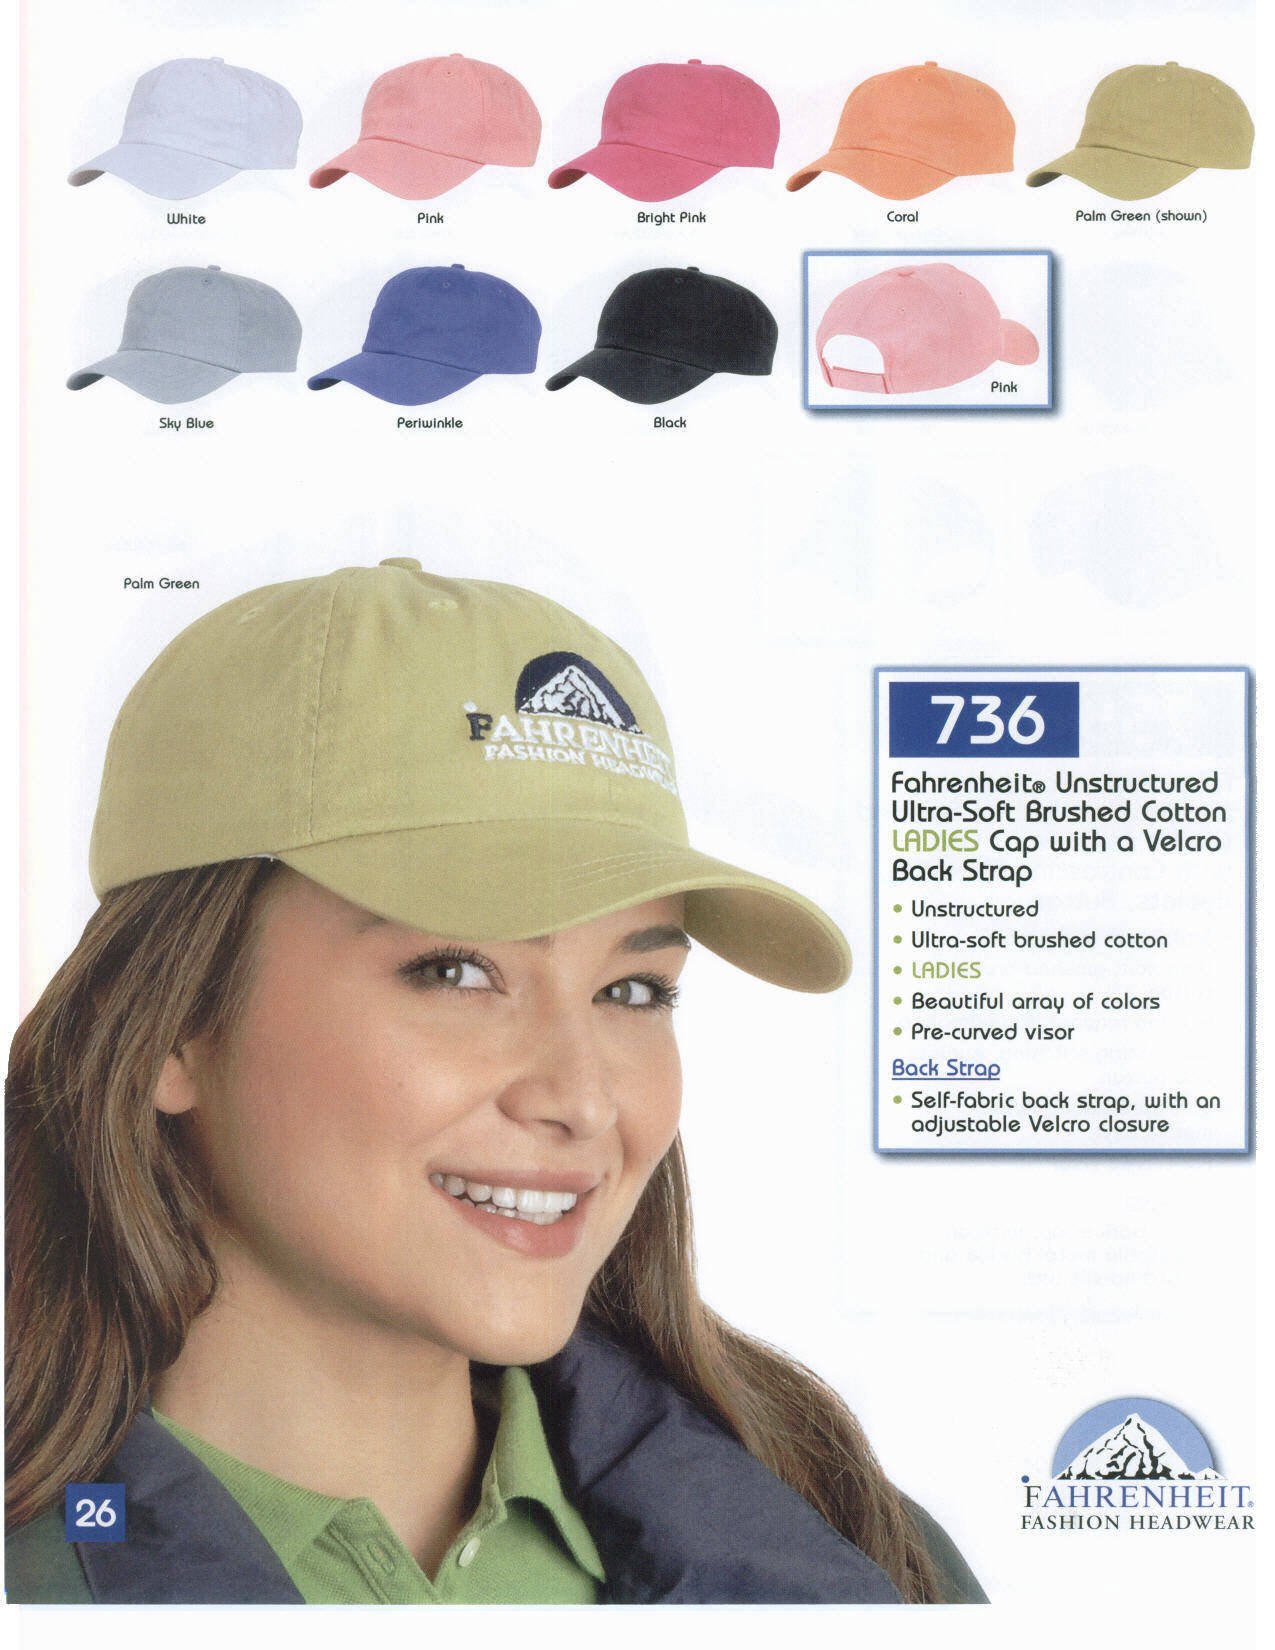 Ladies Cap unstructured Brushed Cotton with Velcro Back strap